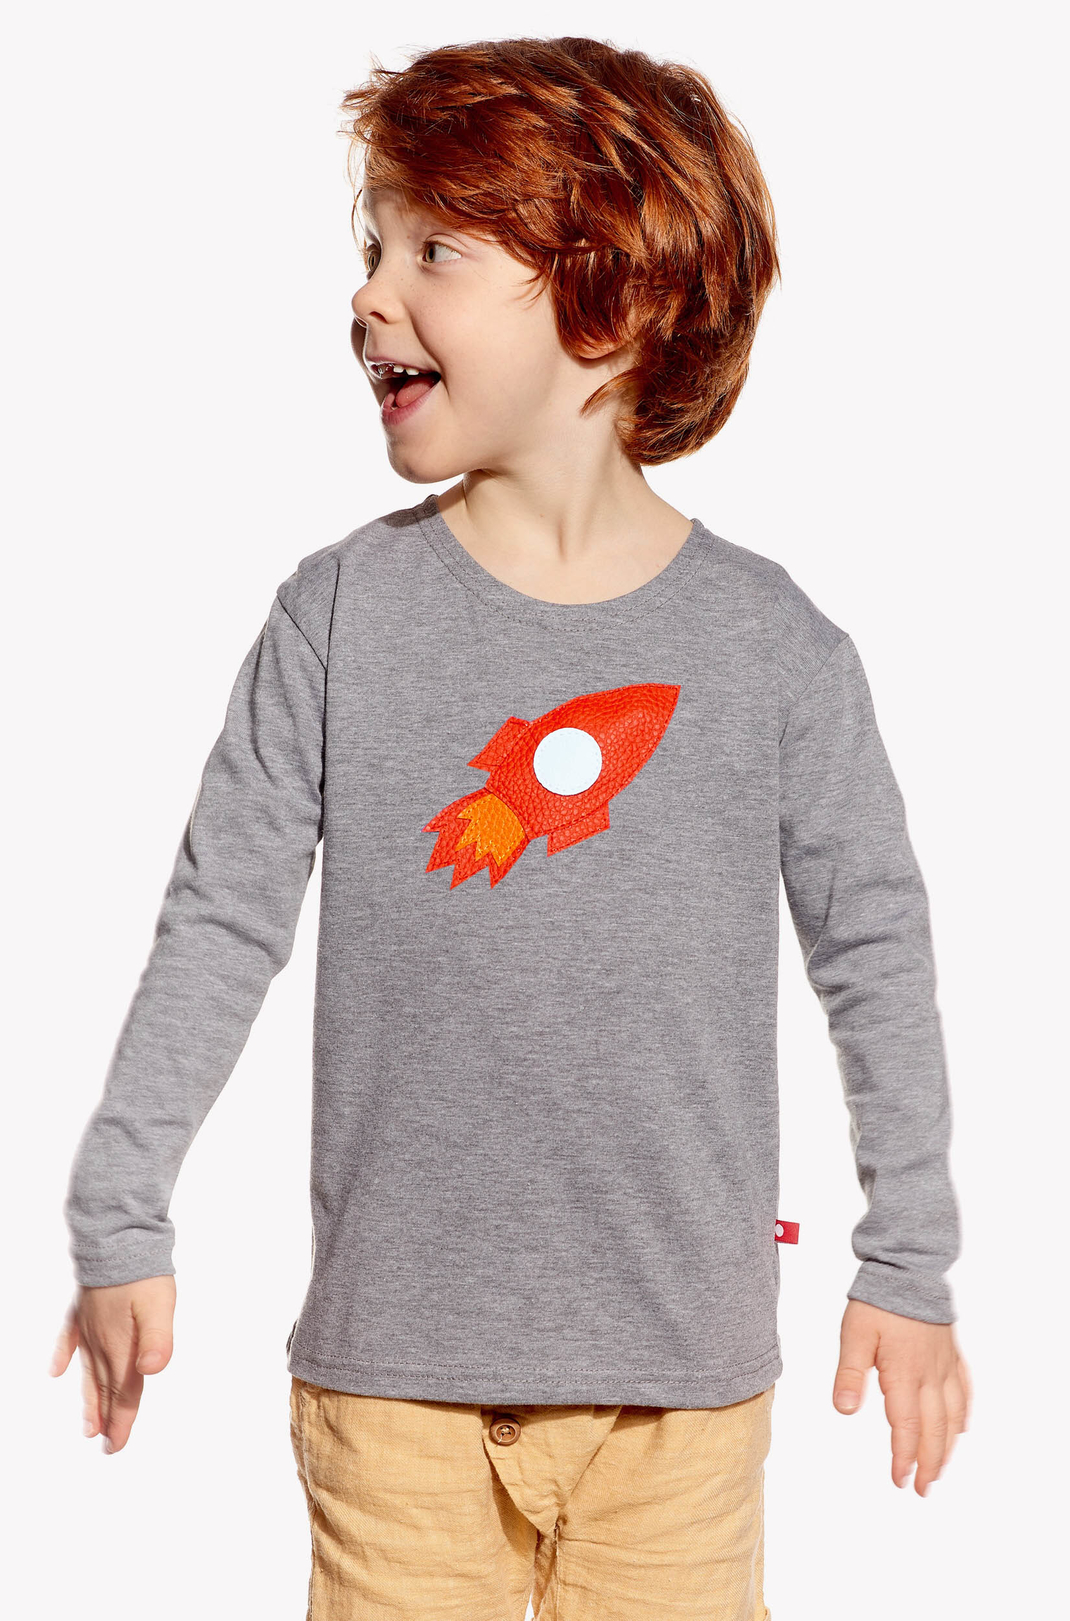 Shirt with rocket